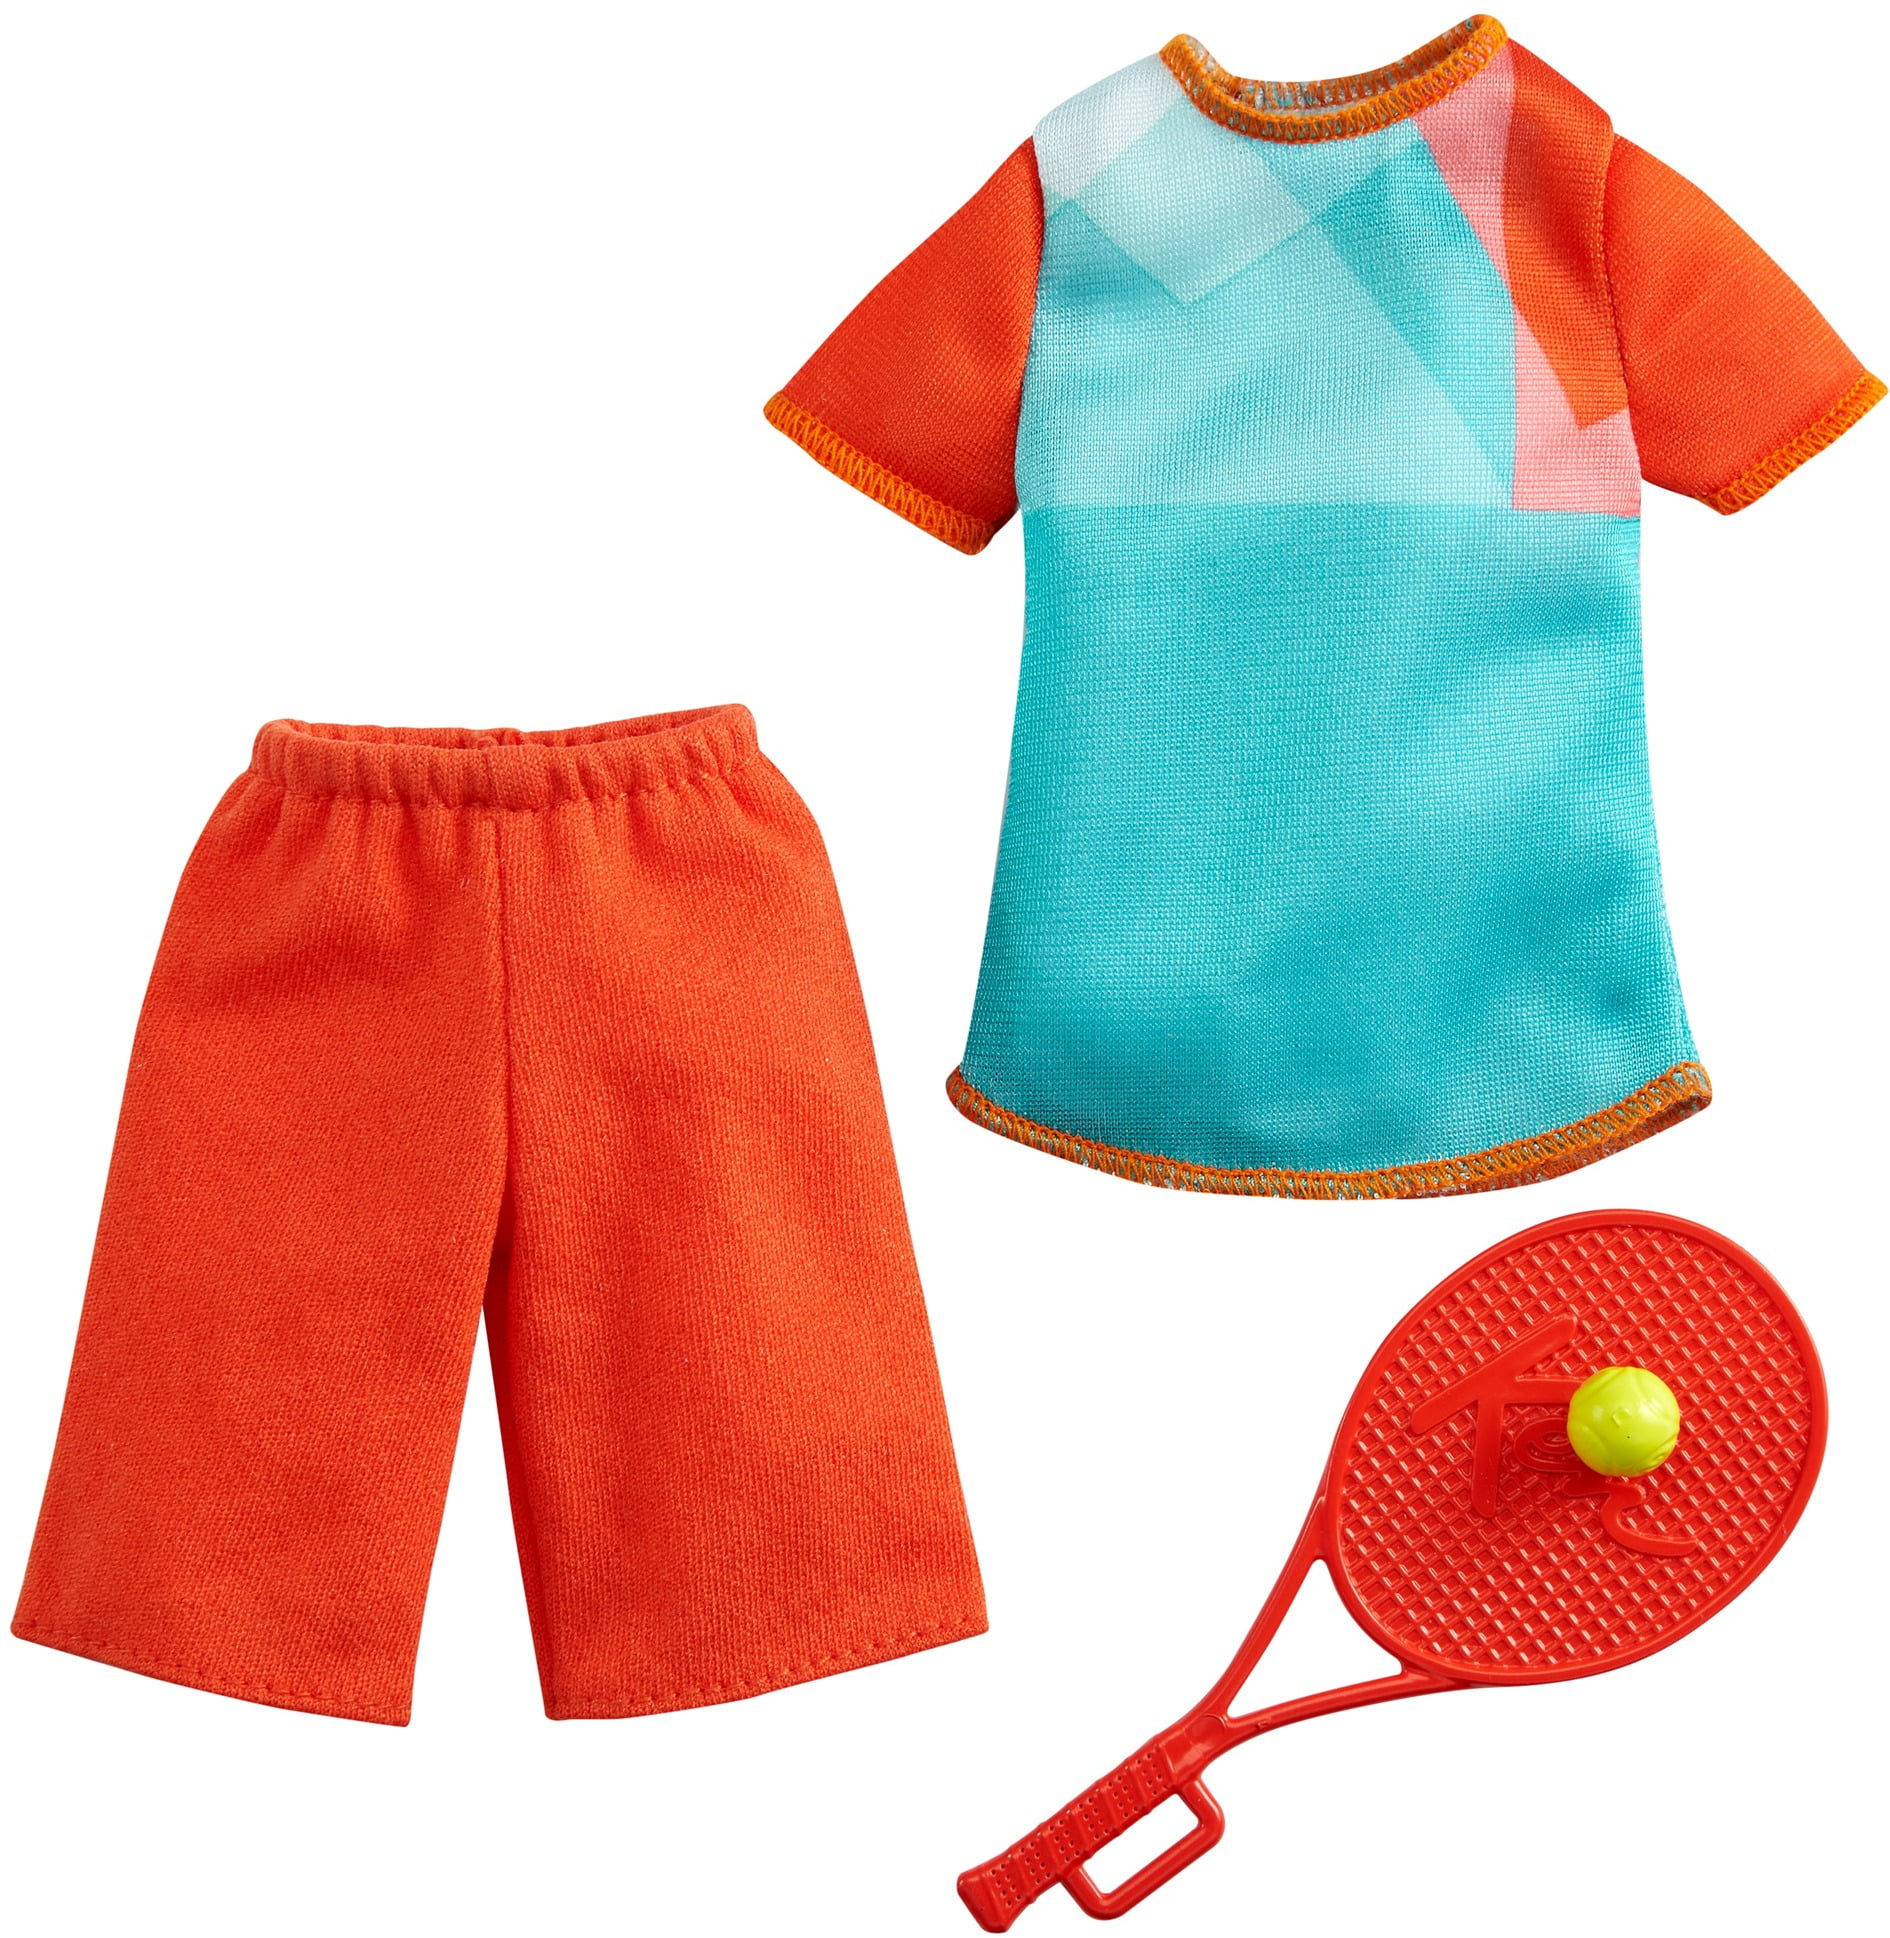 RED TENNIS RACKET & BALL FOR BARBIE DOLL 